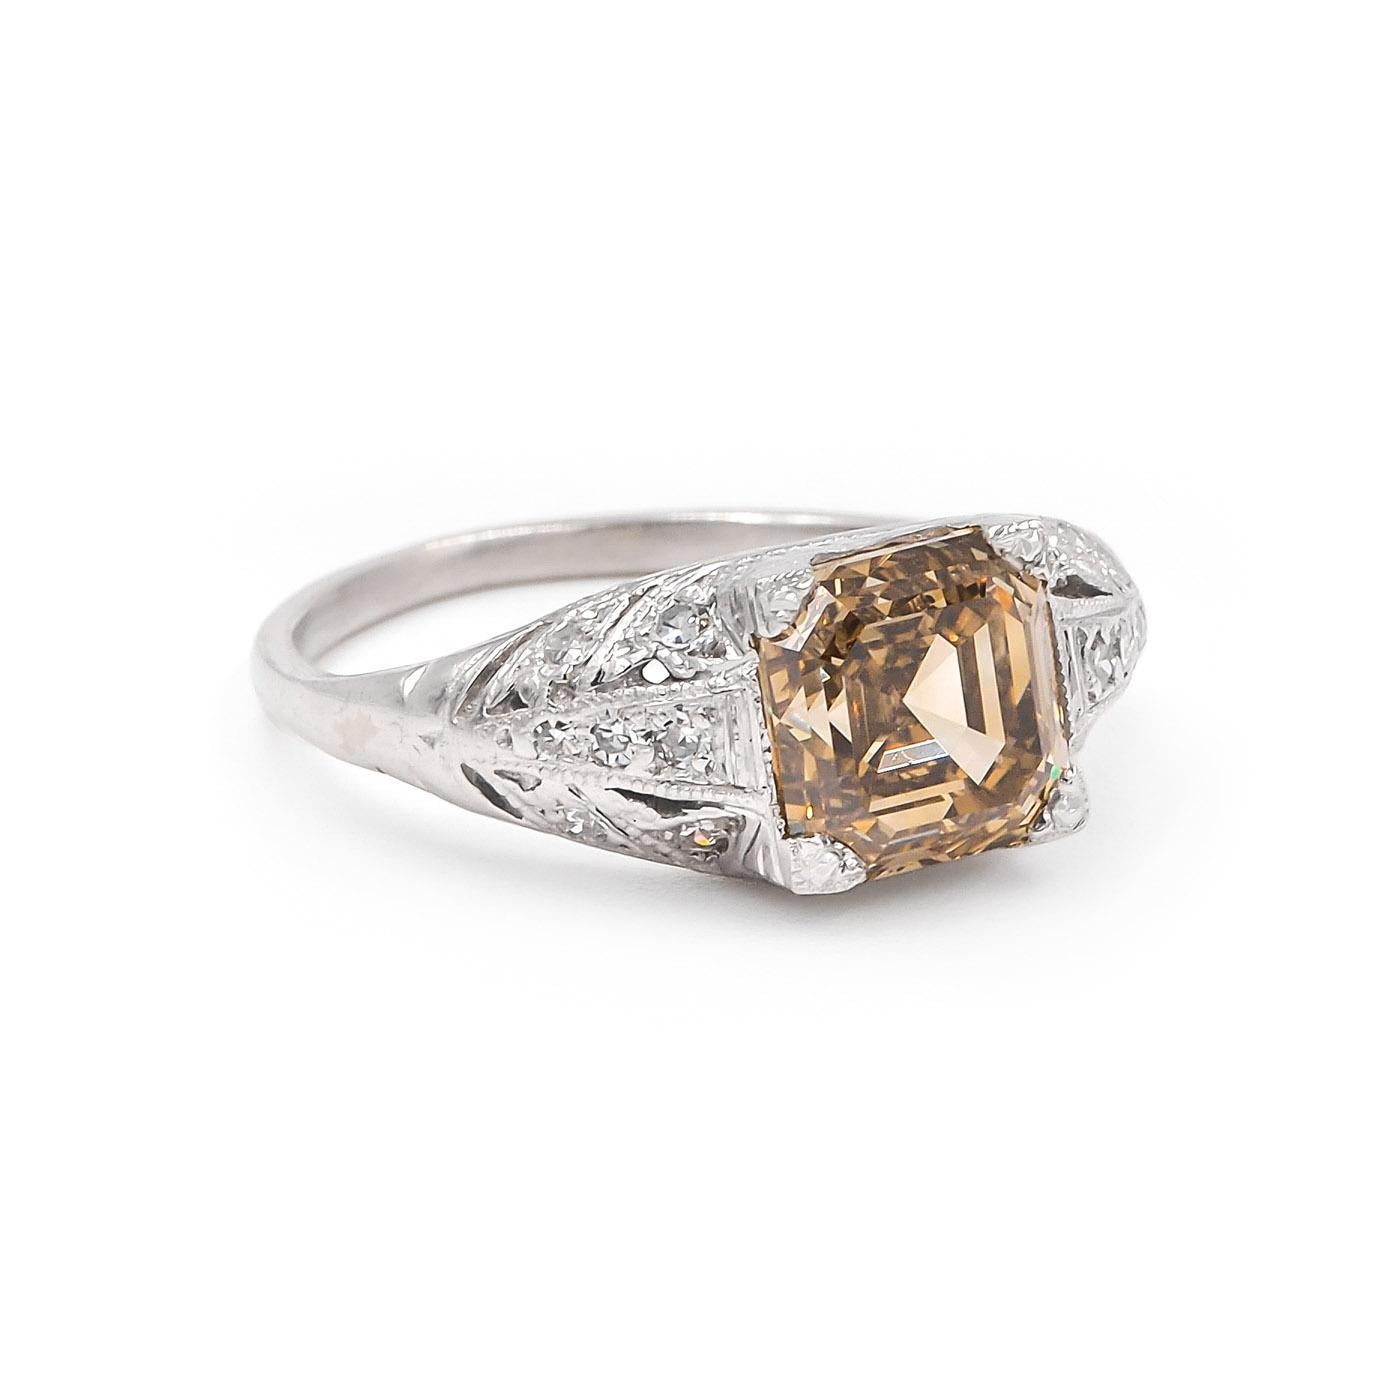 Art Deco era 2.38 Carat Natural Fancy Brown-Yellow Asscher Cut Diamond Engagement Ring, composed of platinum. Centering on a 2.38 carat Asscher Cut diamond, GIA certified Natural Fancy Brown-Yellow color & VS2 clarity. With an additional 14 Single